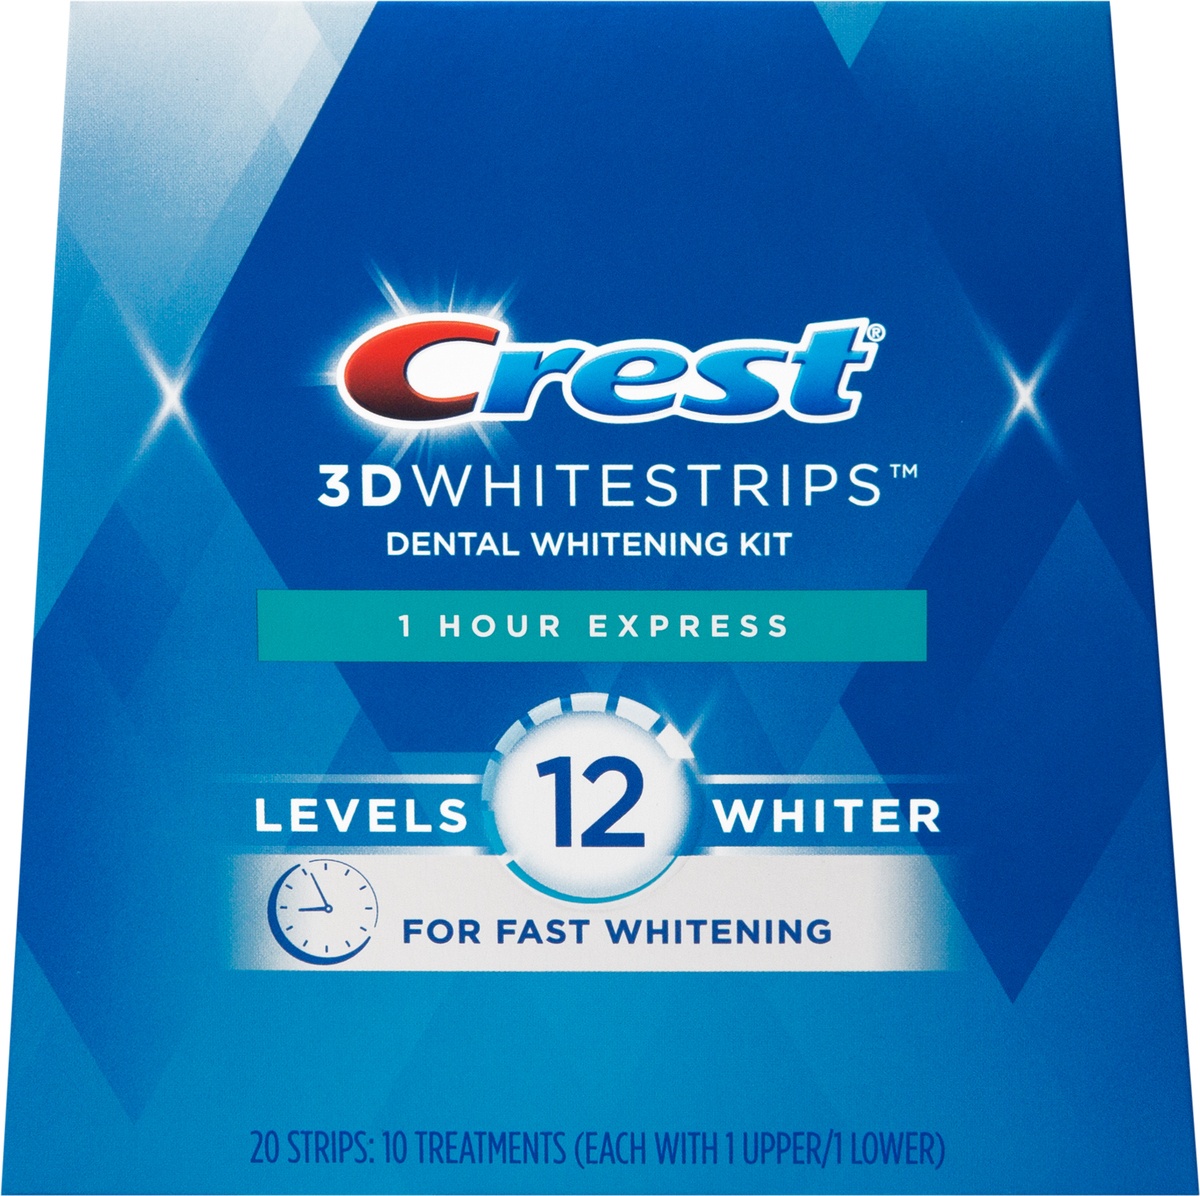 slide 3 of 5, Crest 3D Whitrstrips 1-Hour Express At-home Teeth Whitening Kit, 10 Treatments, 12 Levels Whiter for Fast Whitening, 20 ct